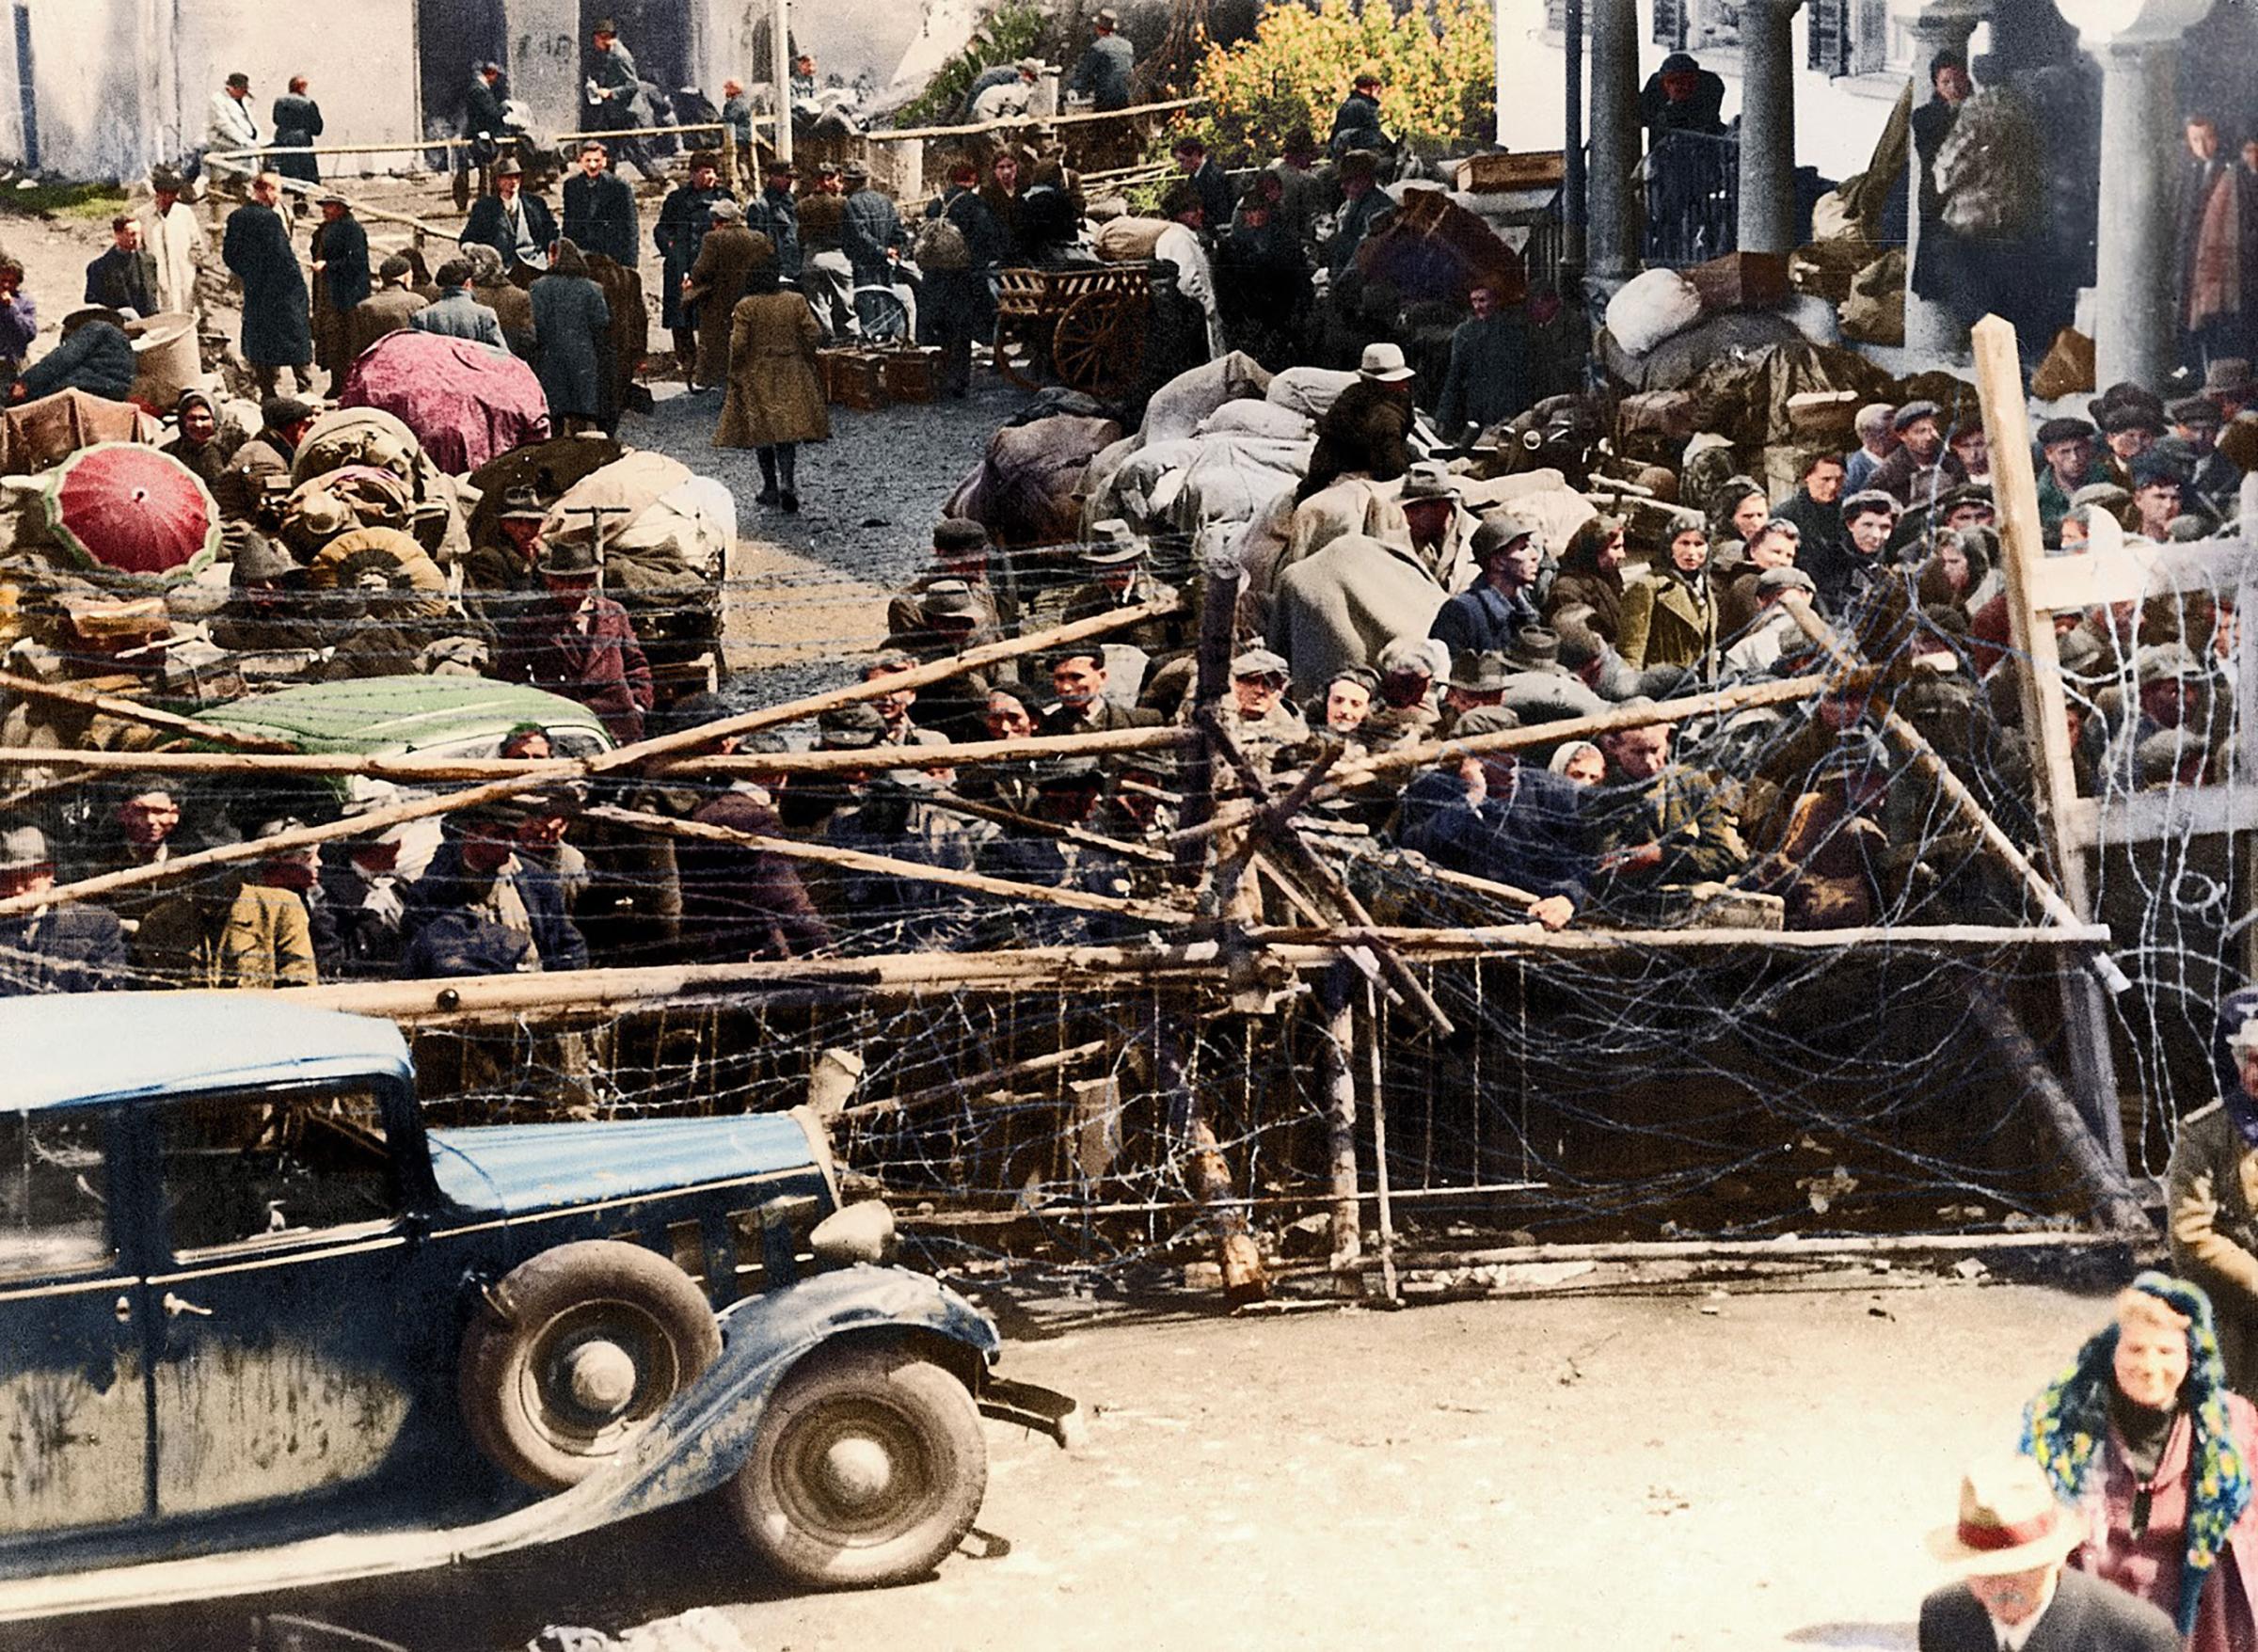 LIECHTENSTEIN - MAY 18:  A Crowd Of Refugees Stood Behind Barbed Wire On May 18, 1945, While Waiting To Cross The Border Into The Neutral State Of Lichstenstein. A Thorough Check By The Customs Office Had To Be Performed For Each Of These Displaced Persons.  (Photo by Keystone-France/Gamma-Keystone via Getty Images)